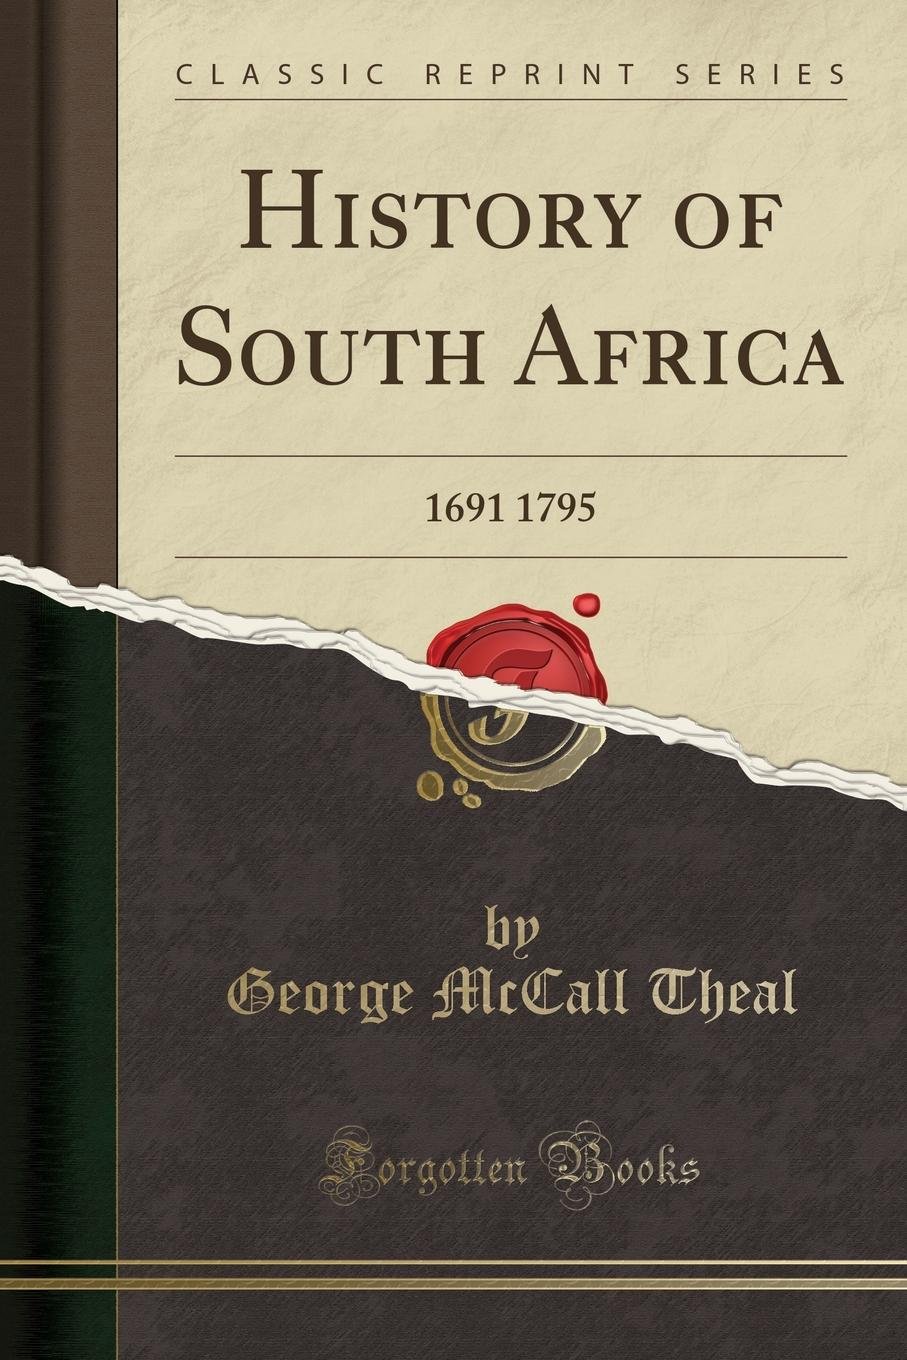 History of South Africa: 1691 1795